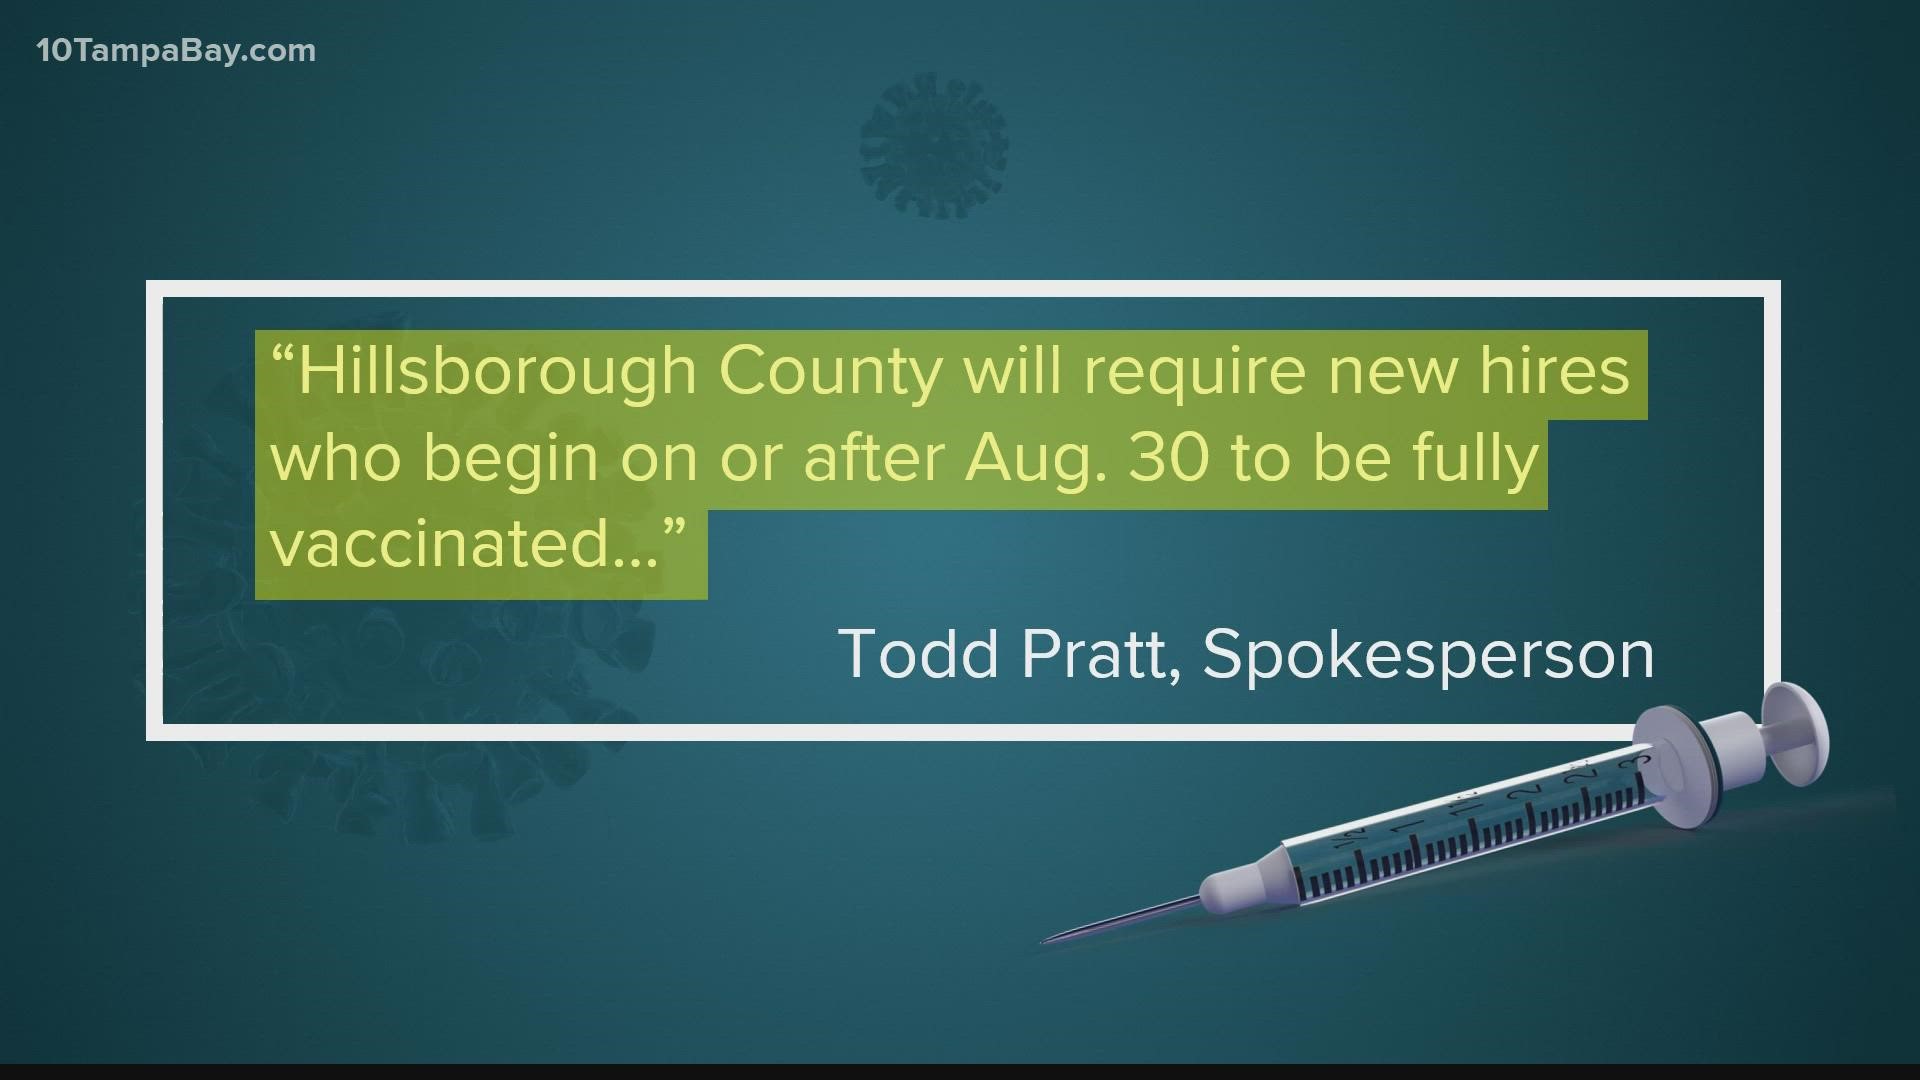 A significant increase in COVID-19 cases pushed the county to require all new employees starting on or after Aug. 30 to be fully vaccinated.